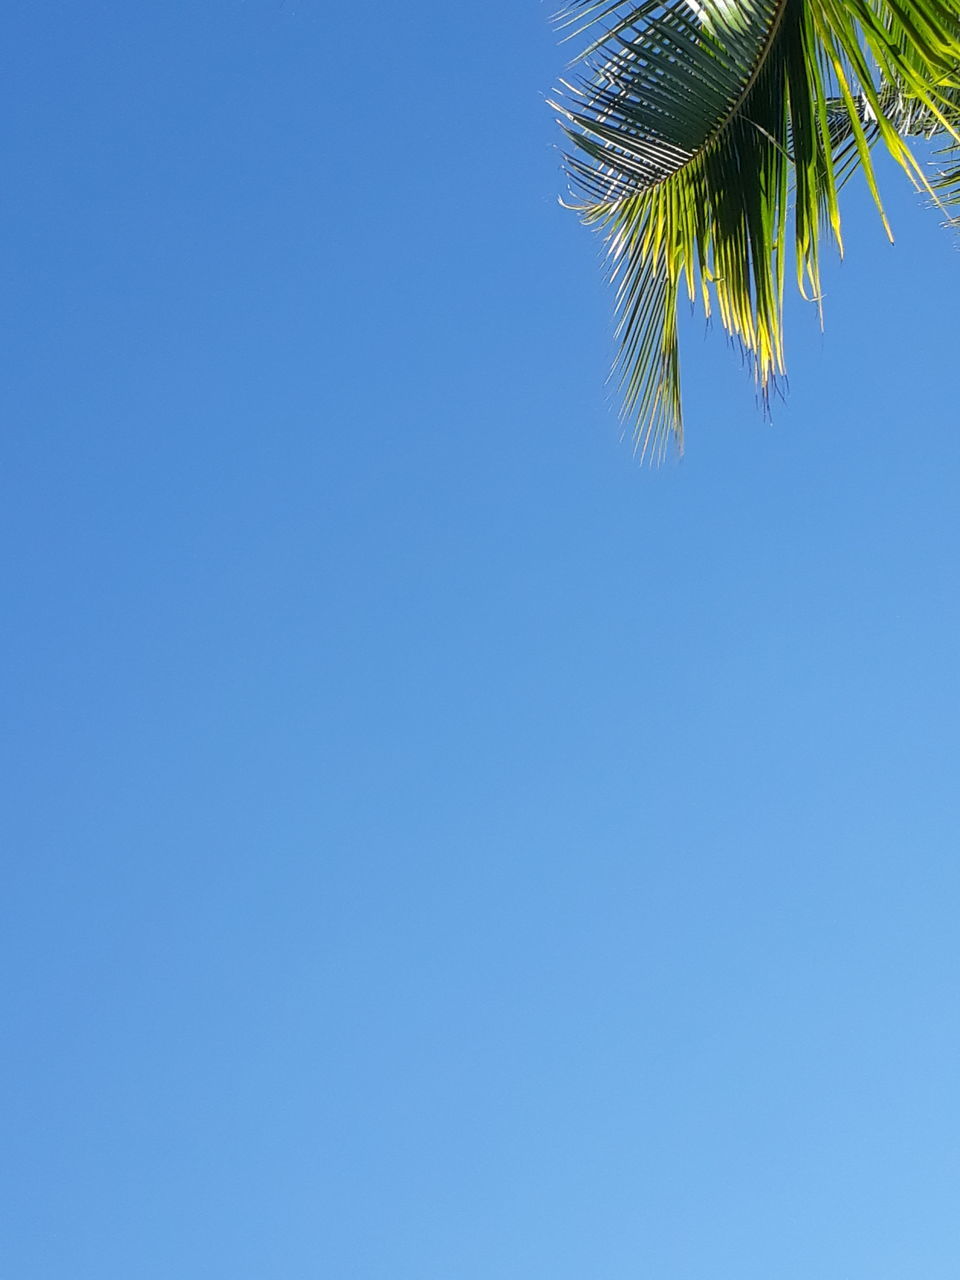 blue, copy space, palm tree, sky, plant, clear sky, nature, tree, tropical climate, leaf, no people, palm leaf, low angle view, beauty in nature, branch, growth, plant part, day, outdoors, grass, sunny, green, sunlight, tranquility, blue background, colored background, backgrounds